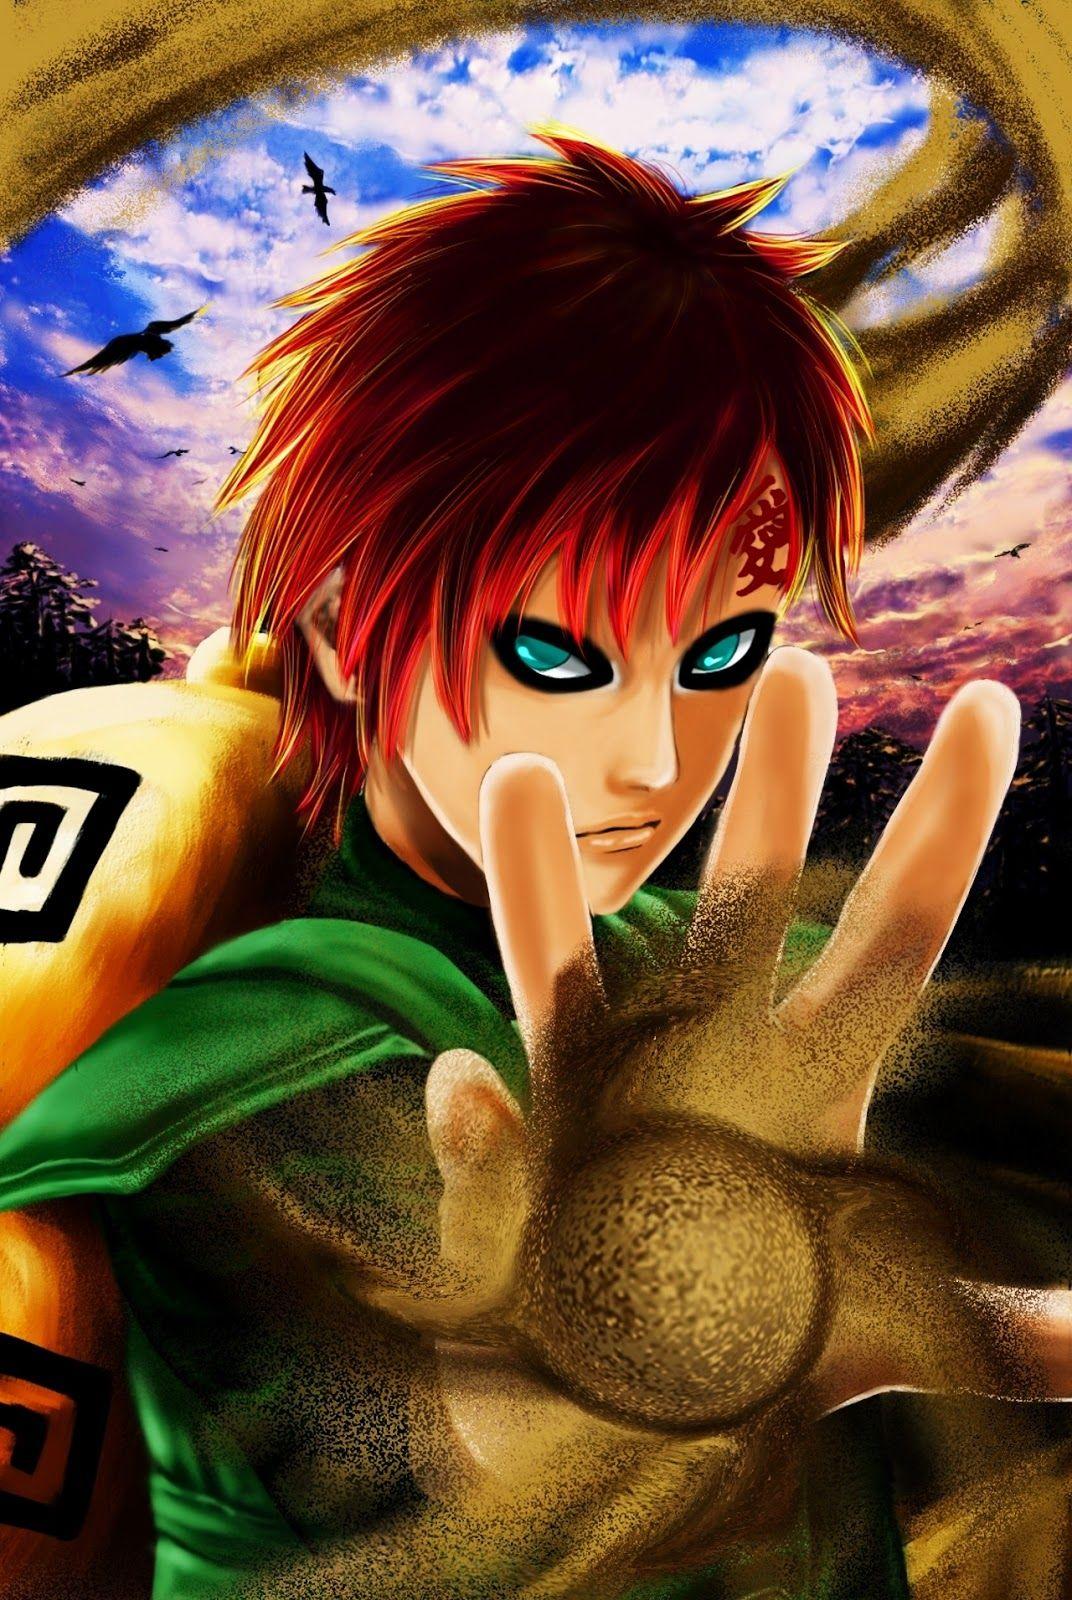 Gaara Of The Sand 3D Picture, Wallpaper, and Fanart. [Naruto]DAPIC